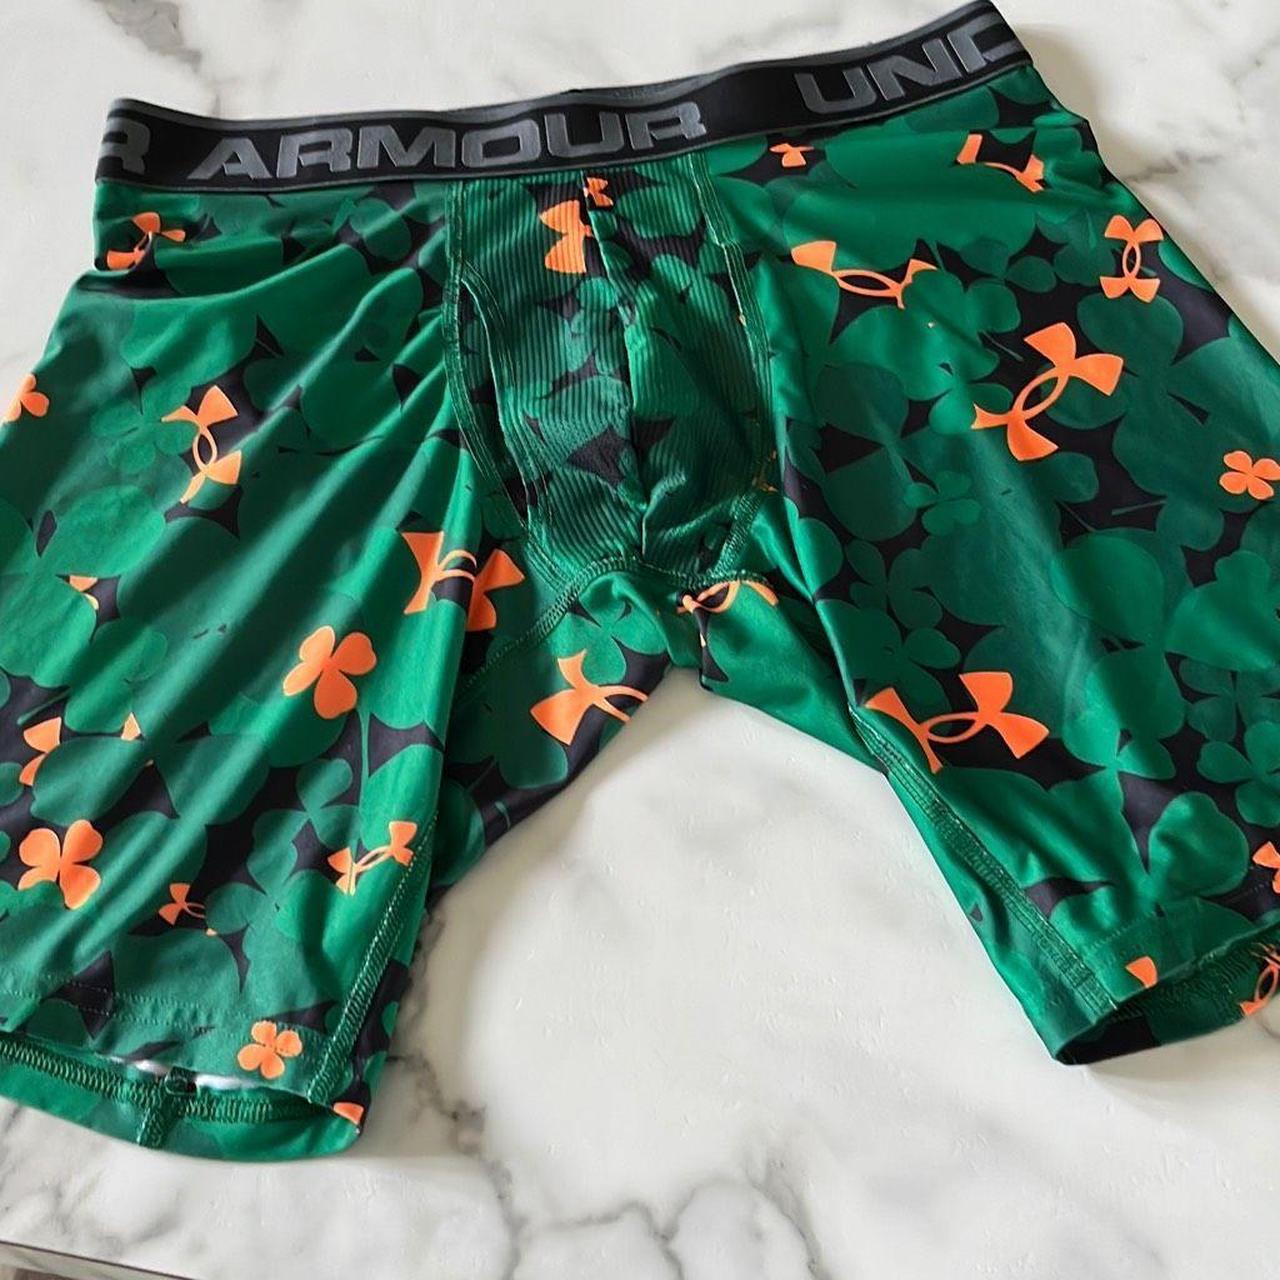 Men's Under Armour Boxers, New & Used